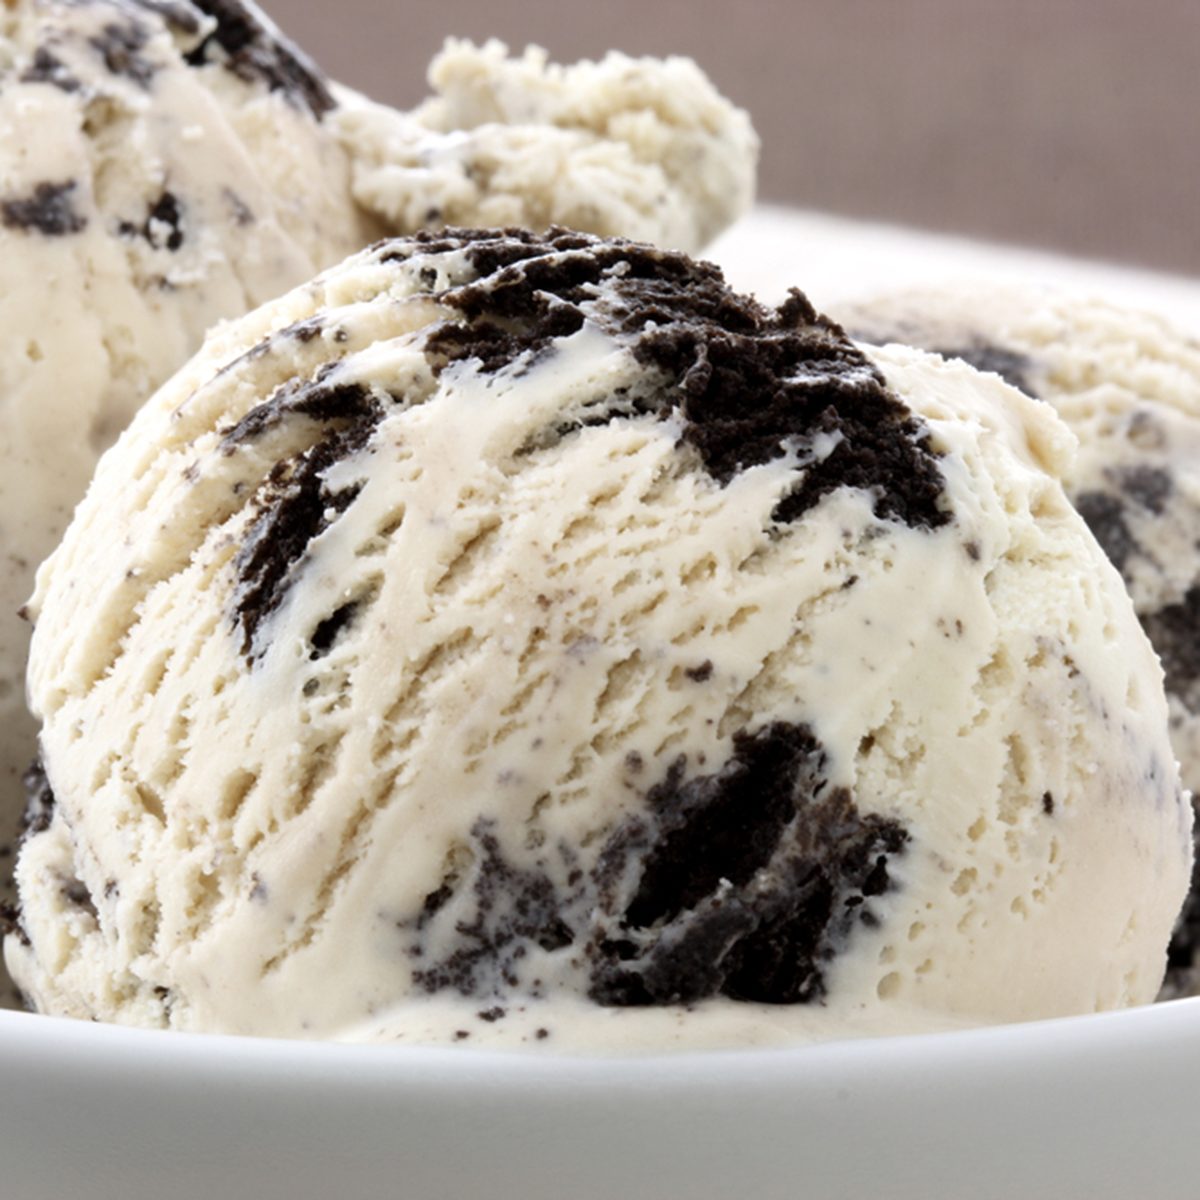 real cookies and cream ice cream, not made with mashed potatoes or shortening and meets all the regulations regarding using real dairy products to advertise dairy. Shallow dof; Shutterstock ID 79614241; Job (TFH, TOH, RD, BNB, CWM, CM): Taste of Home